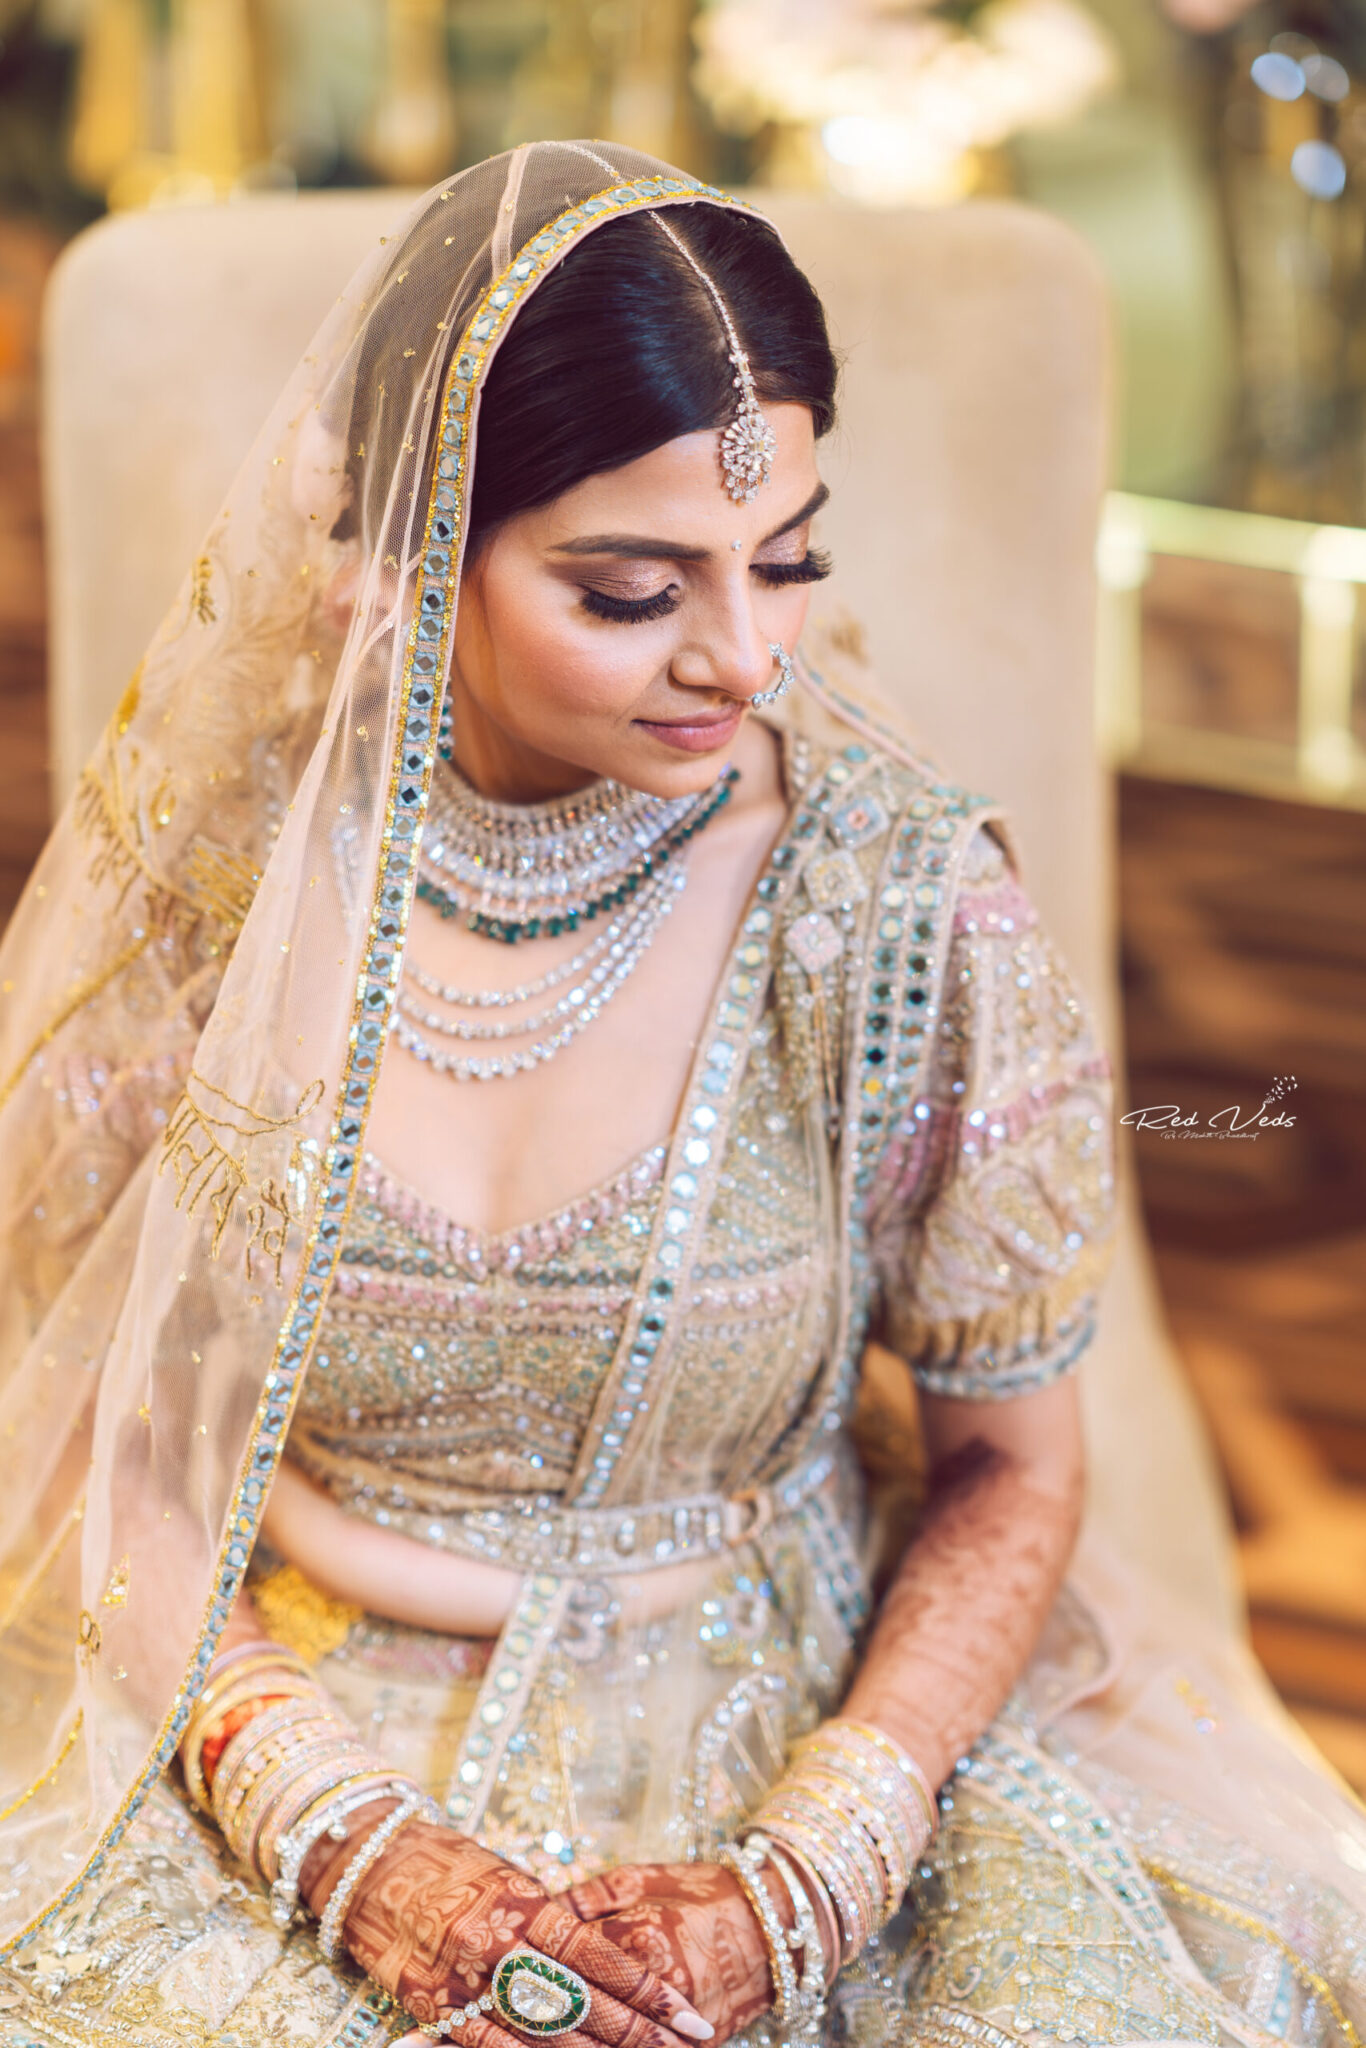 Bridal Portraits Poses - 20 Elegant Poses Crafted for You